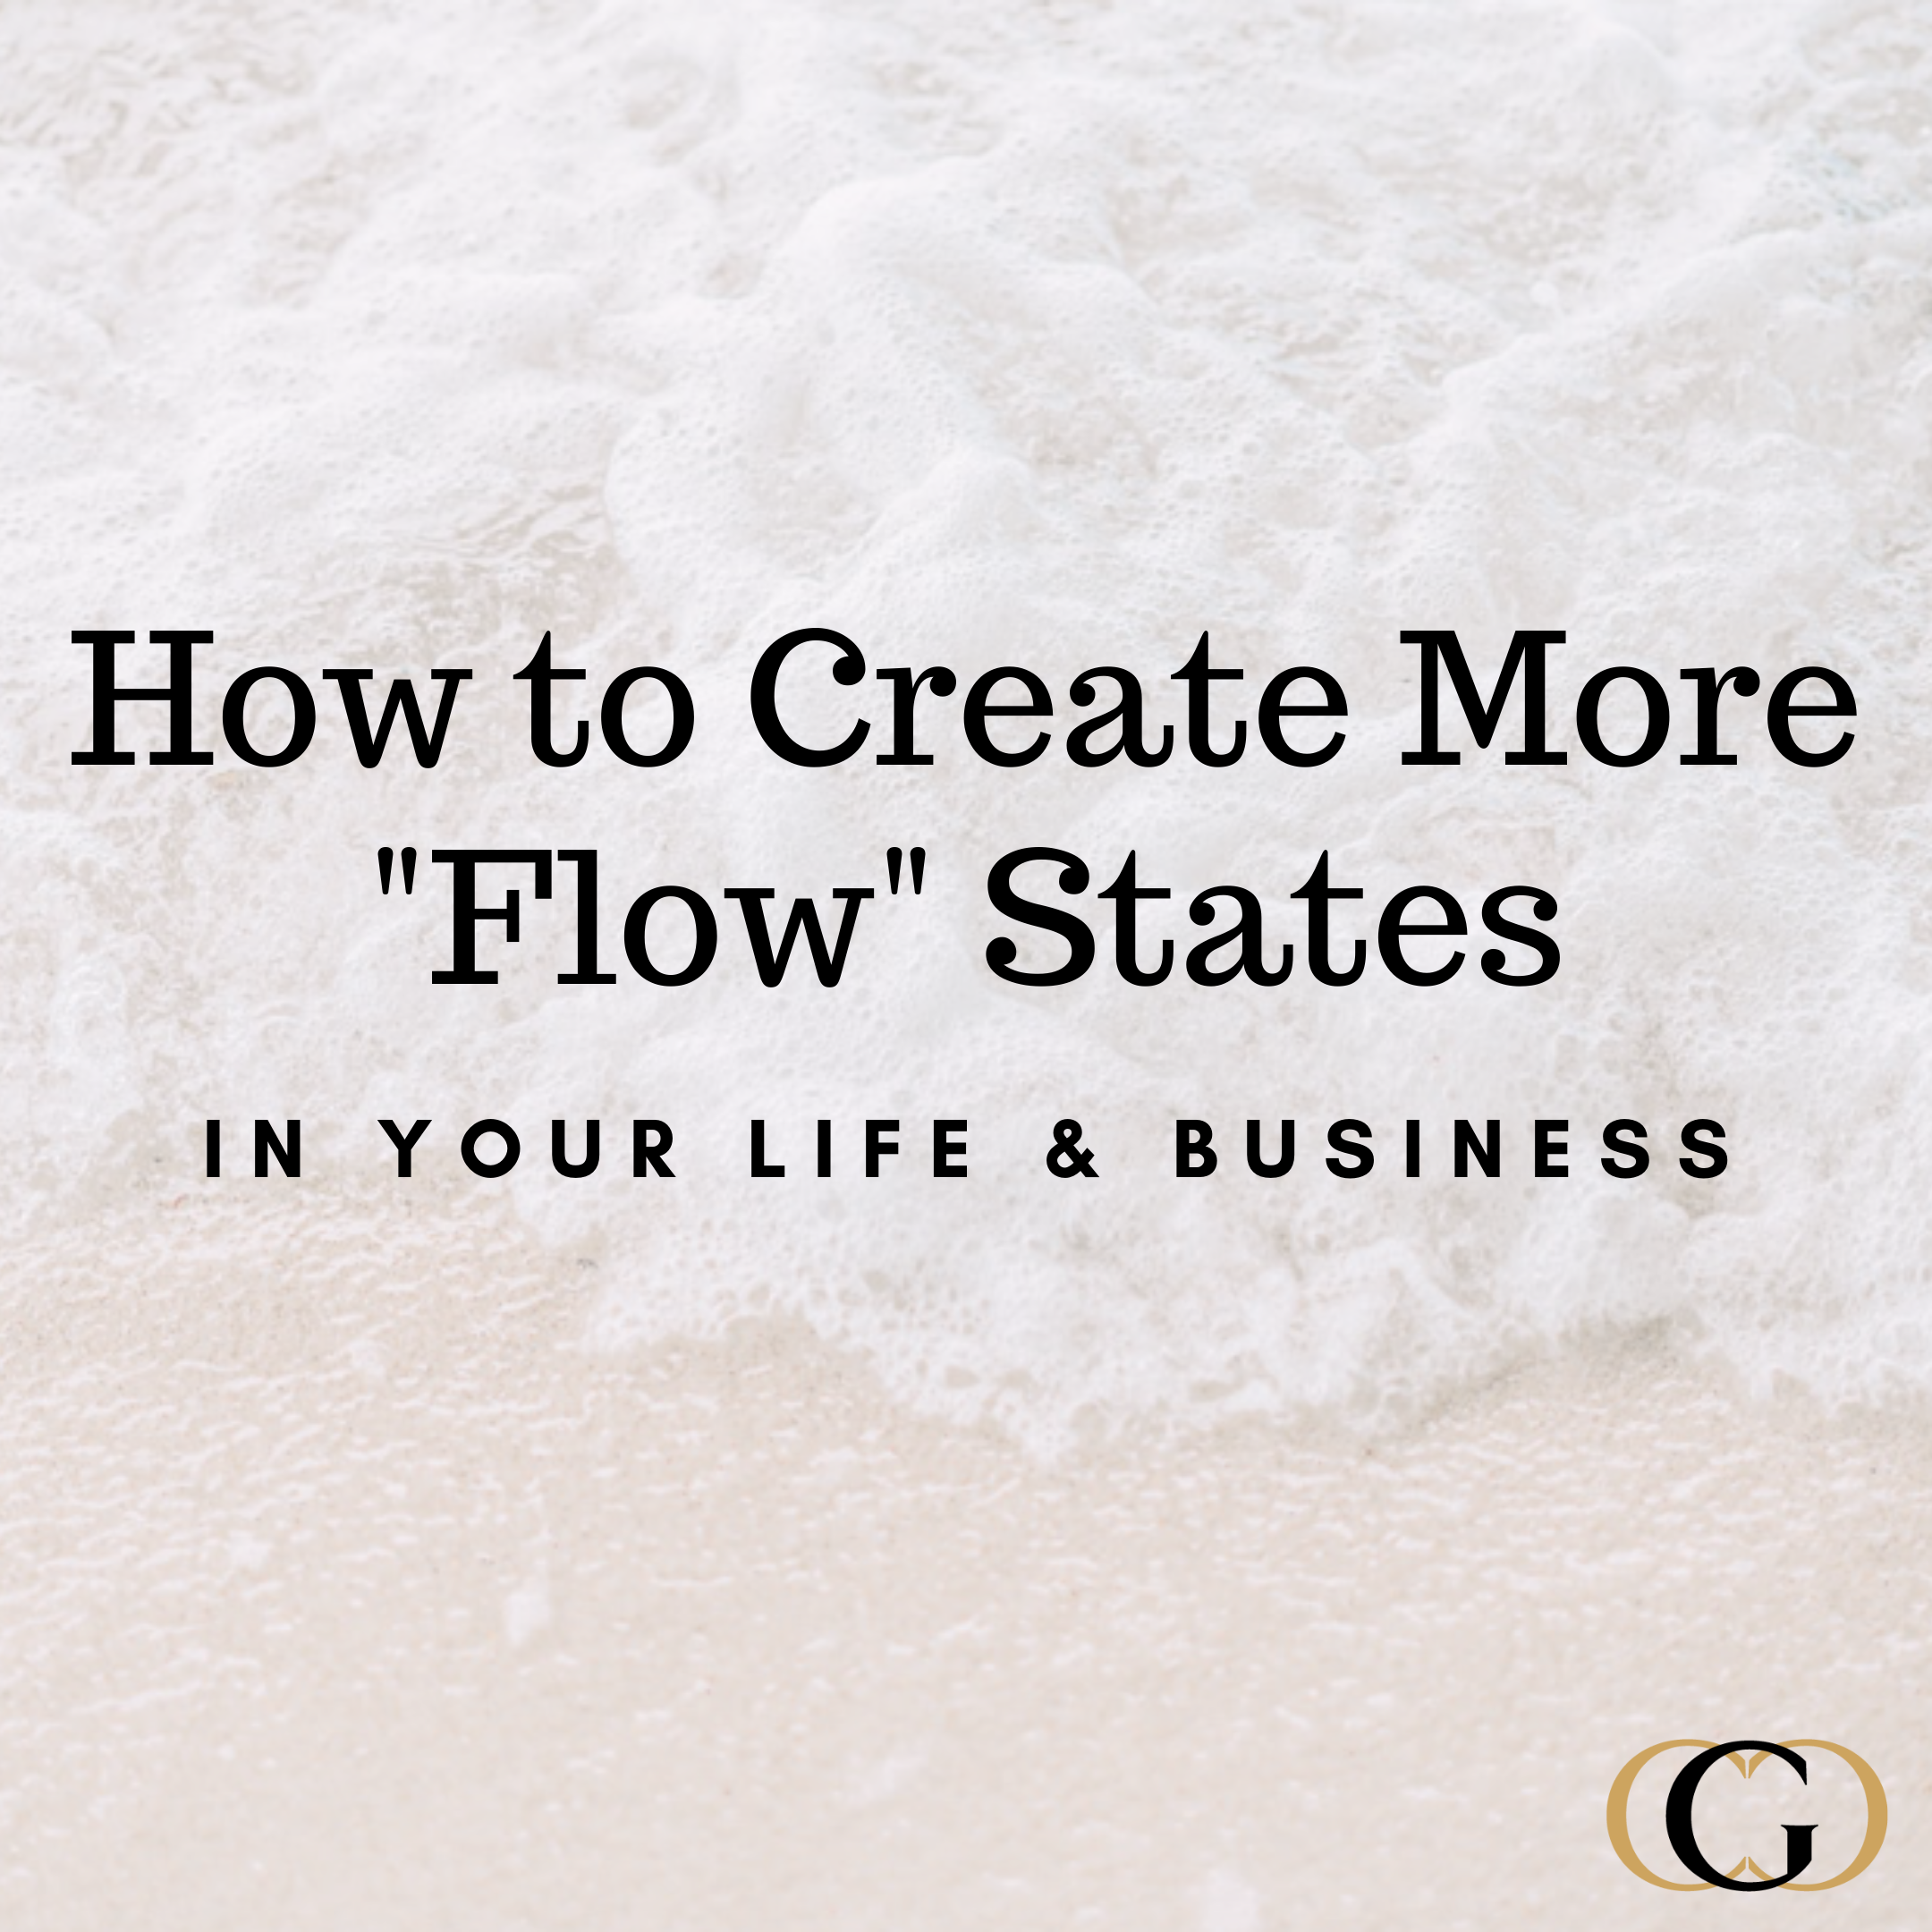 How to Create More “Flow” States in Your Life & Business